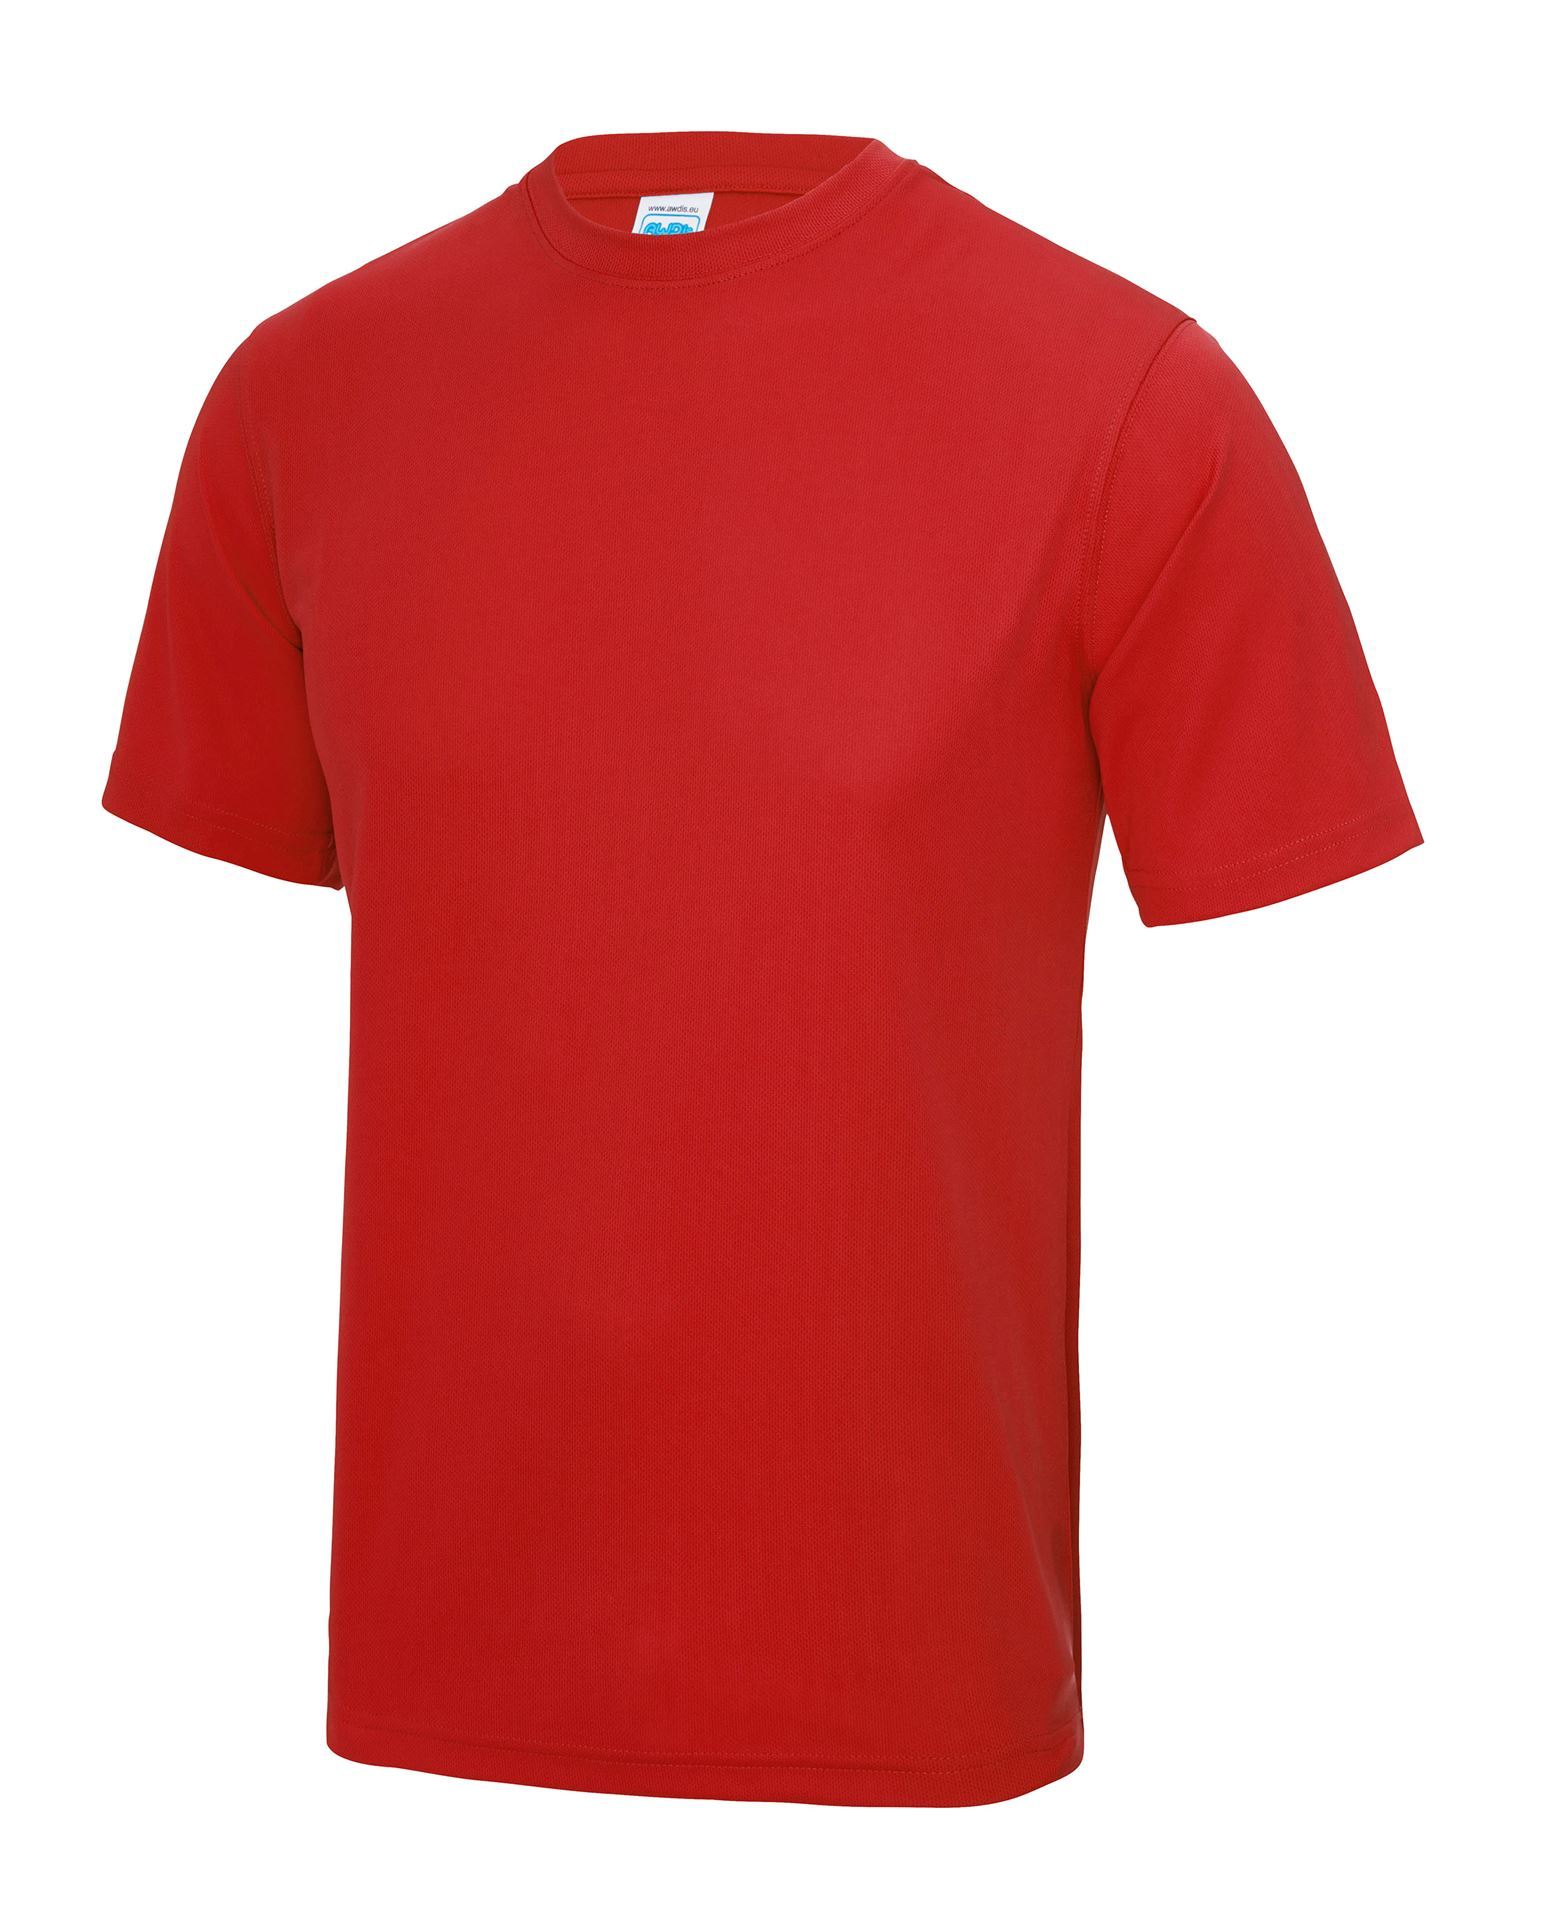 2 X AAPTI / RAPTCI PT (Neoteric) High Performance (Black / Red) T-Shirt 1303 - C1000 Stitches